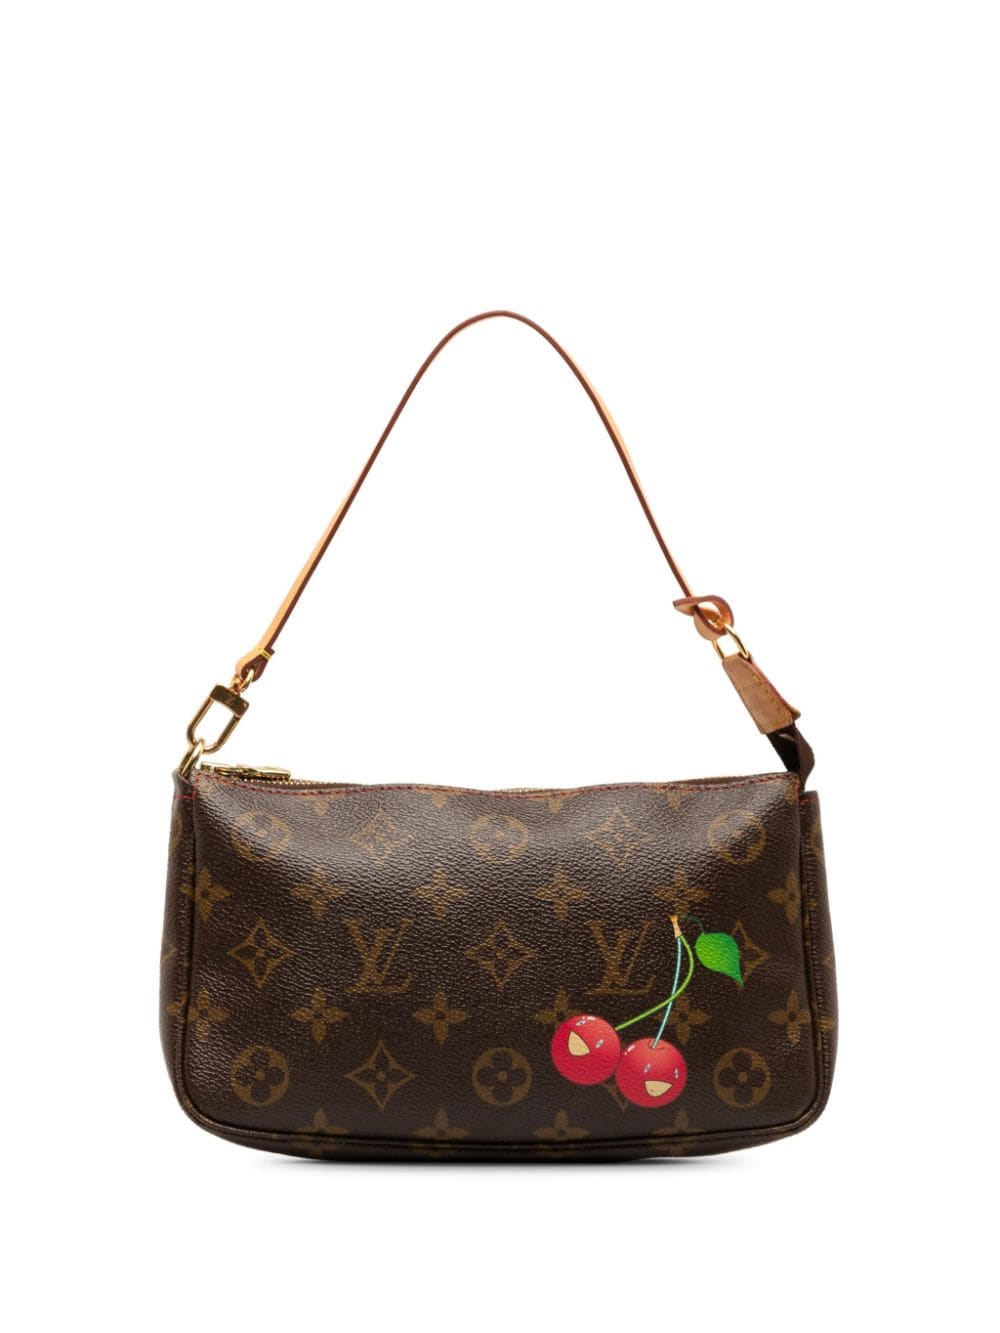 Image 1 of Louis Vuitton Pre-Owned x Takashi Murakami 2005 Pochette Accessoires clutch bag